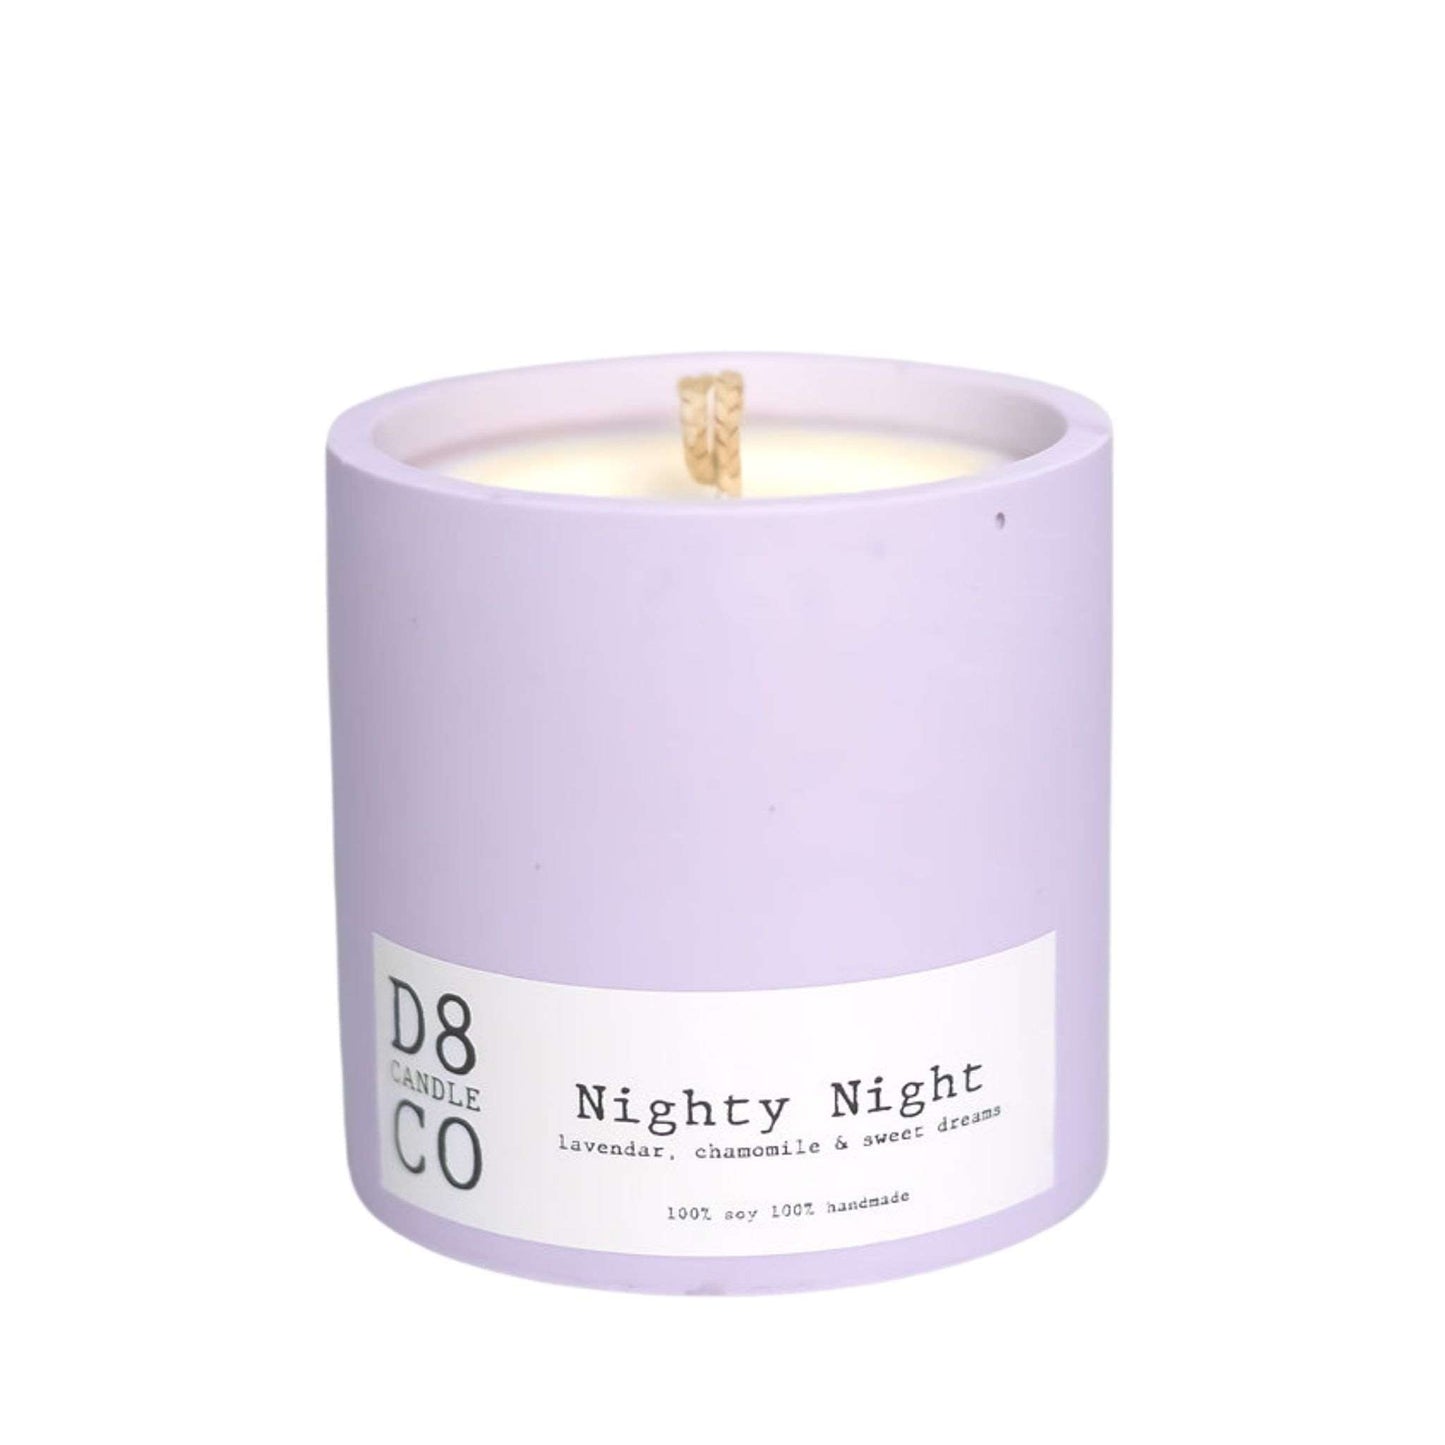 D8 Candle Co. Candles Nighty Night Candle - D8 Candle Co.